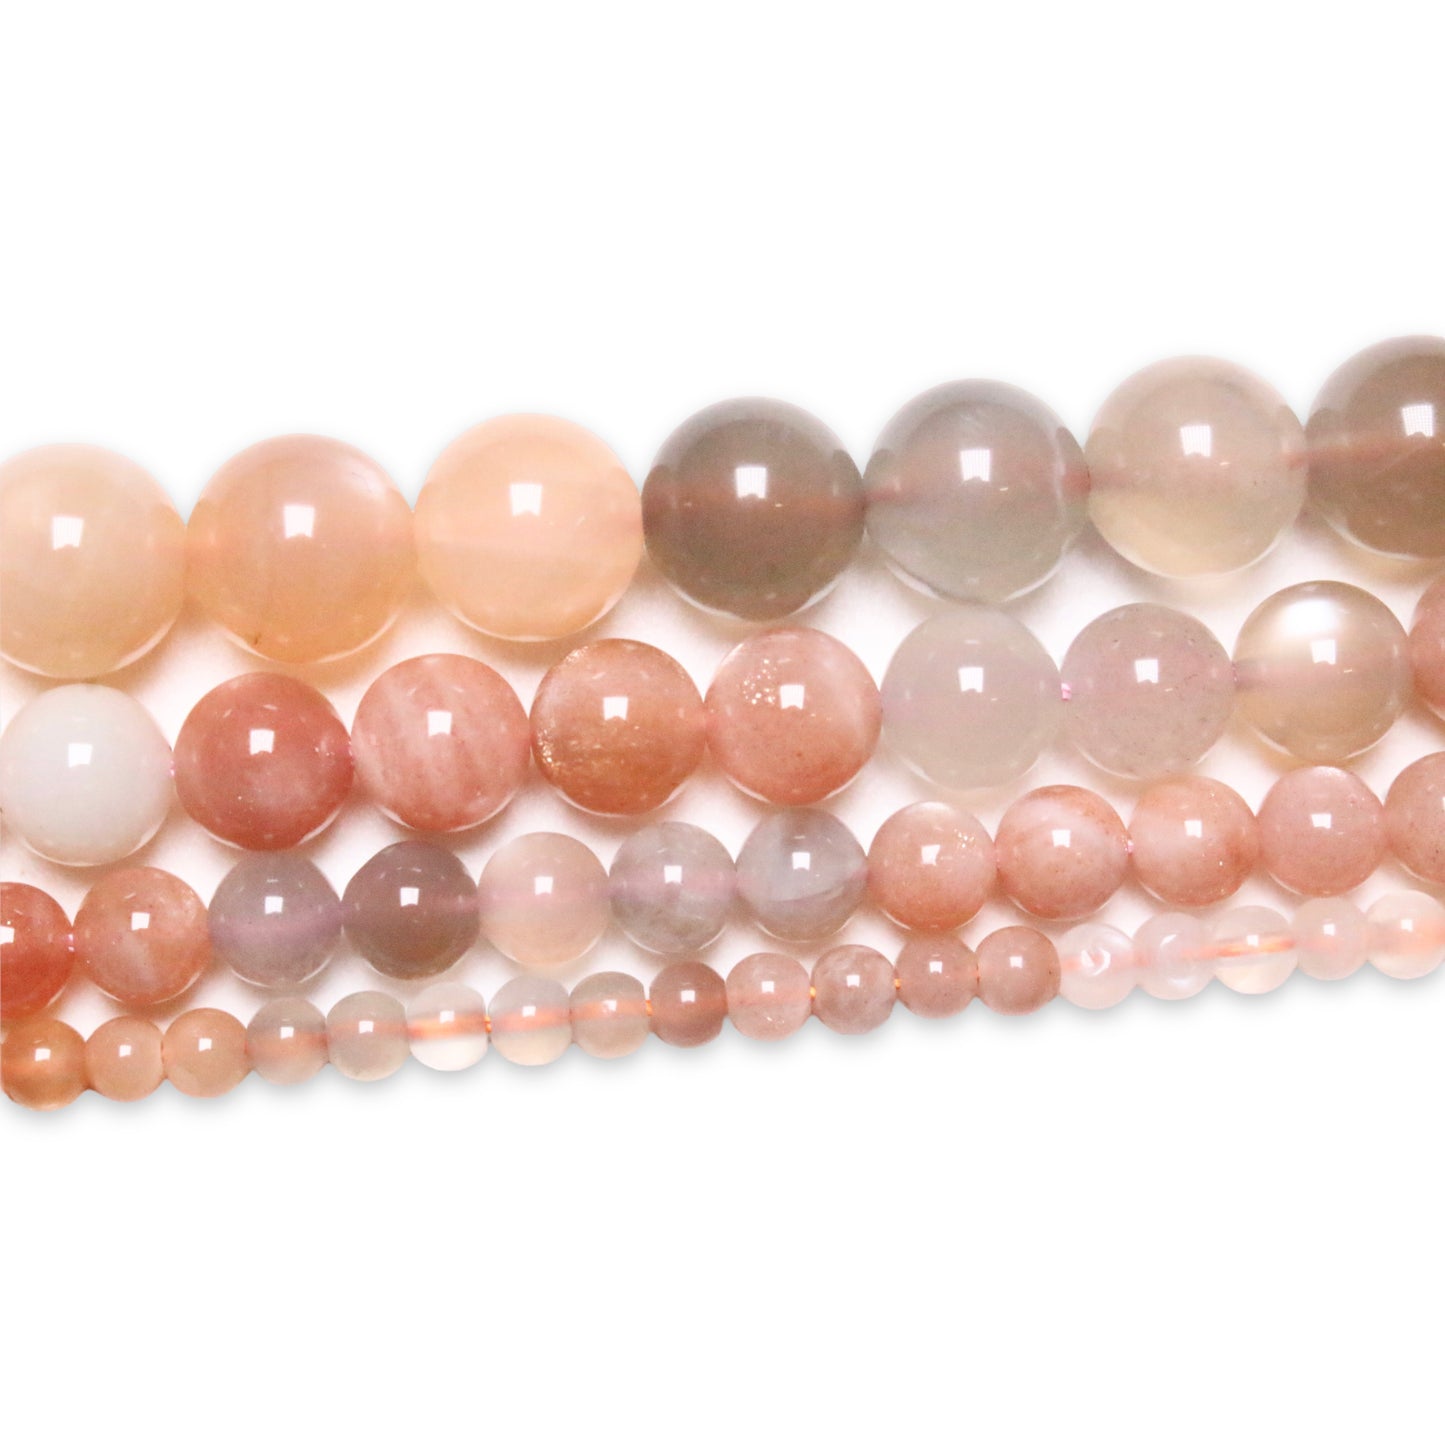 Multicolored moon moon pearl wire